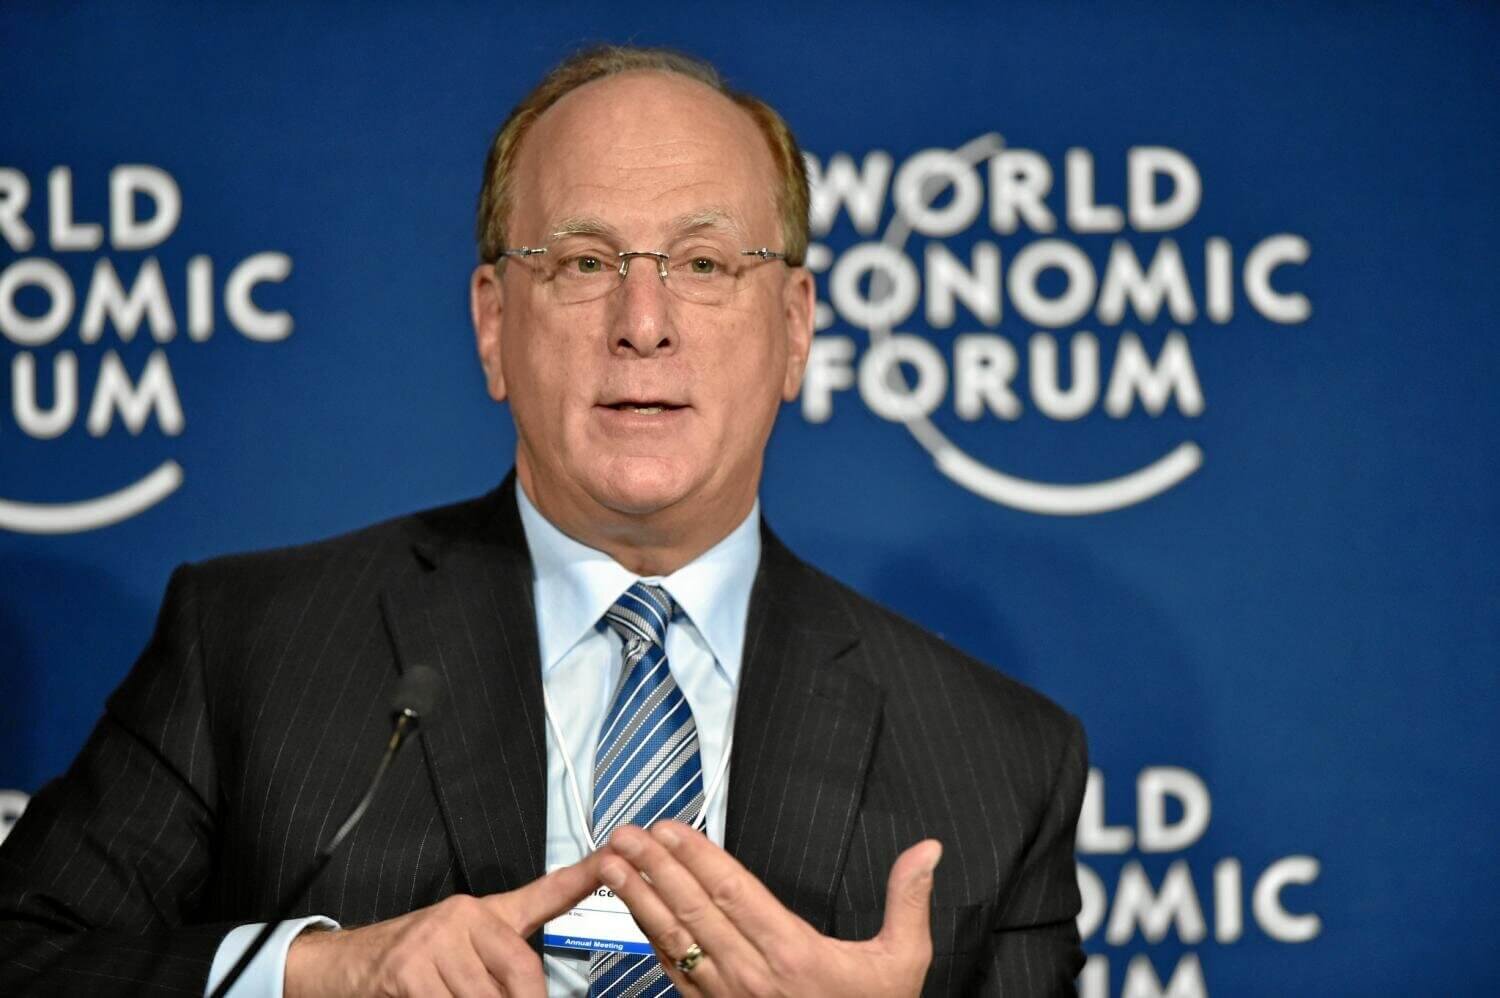 Larry Fink, CEO and Chairman of BlackRock, Inc